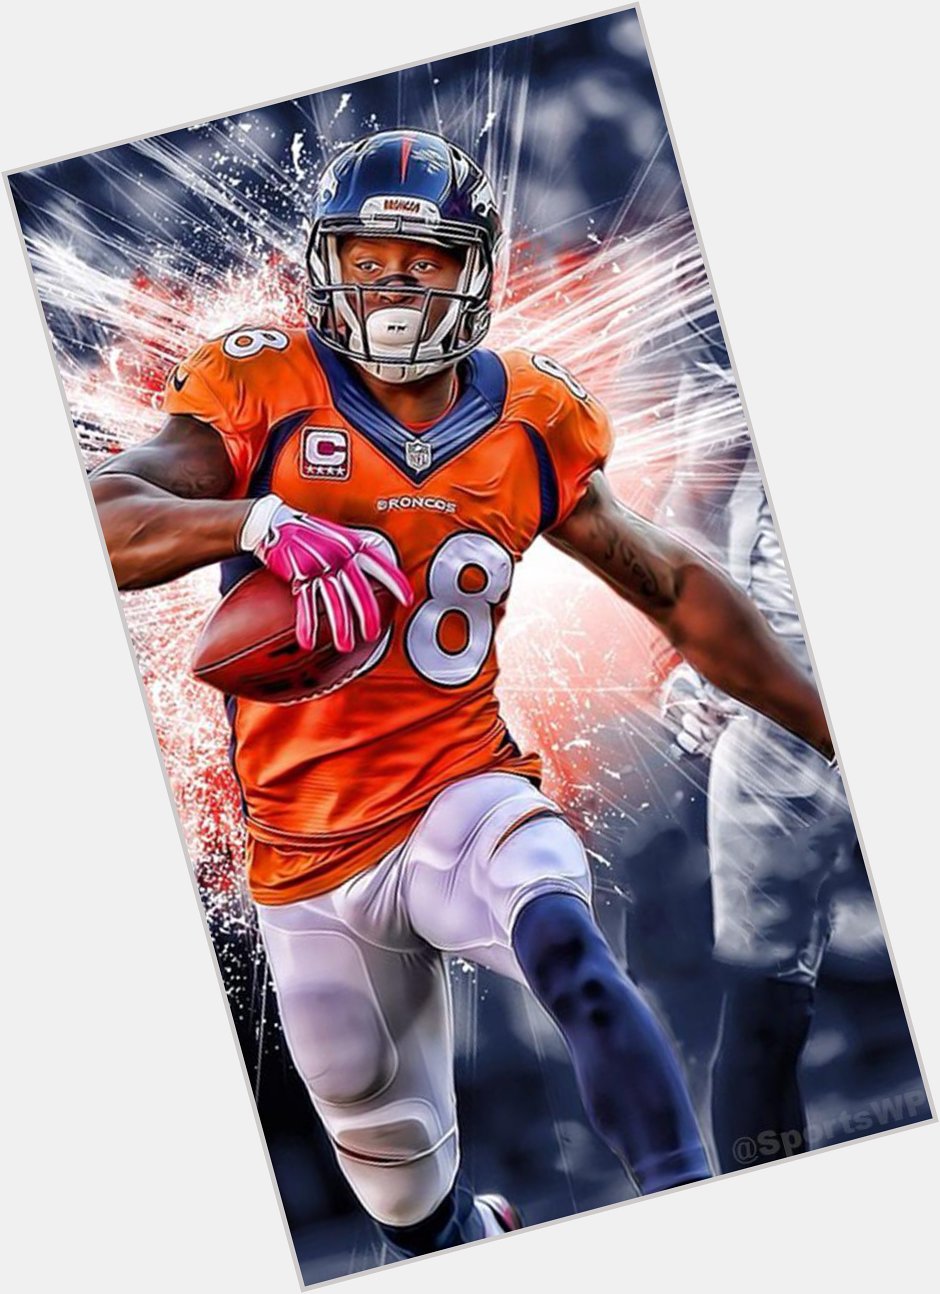 Happy Birthday To The Legendary Demaryius Thomas U Are The Greatest Football Player Of All Time We Miss U Alot     